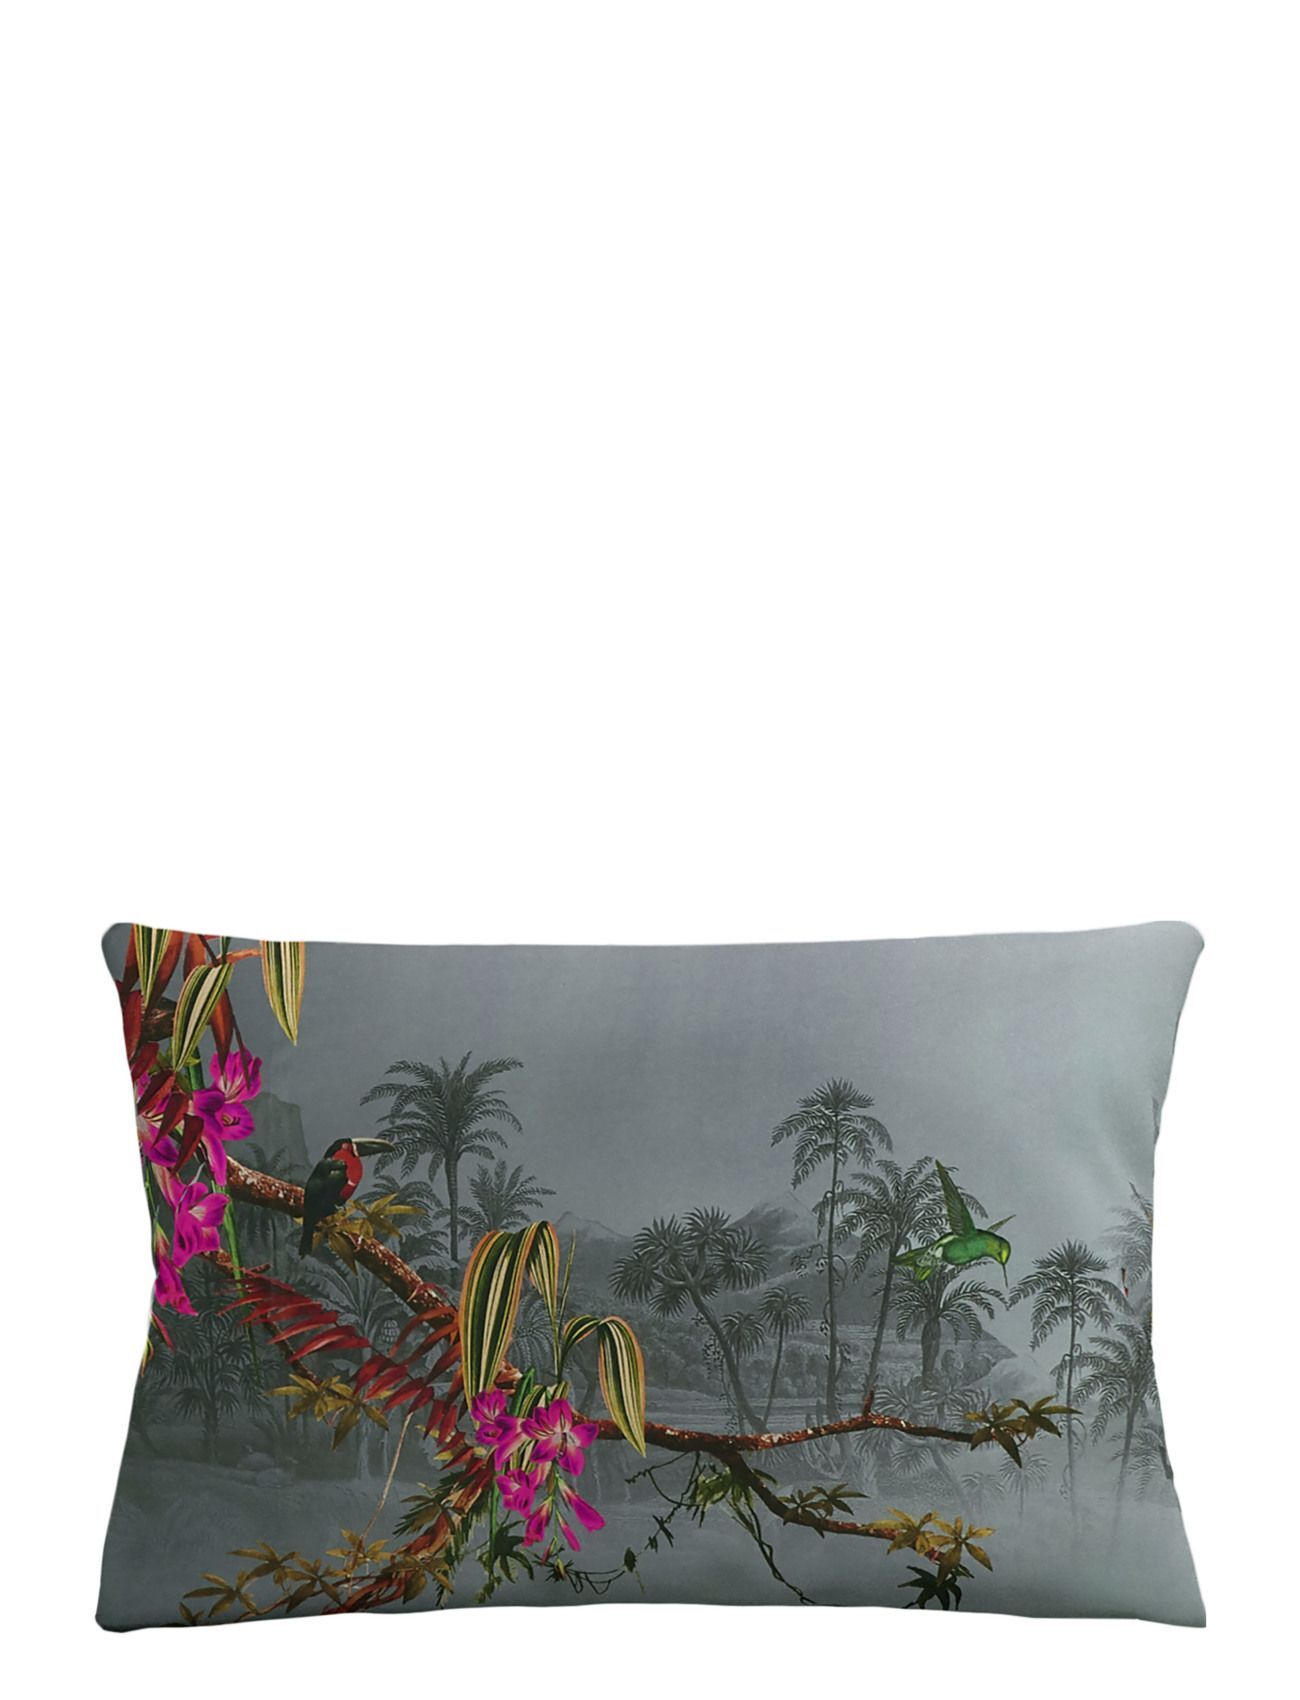 Ted Baker Hibiscus Pillowcase Single 1 Pc Home Textiles Bedtextiles Pillow Cases Grå Ted Baker